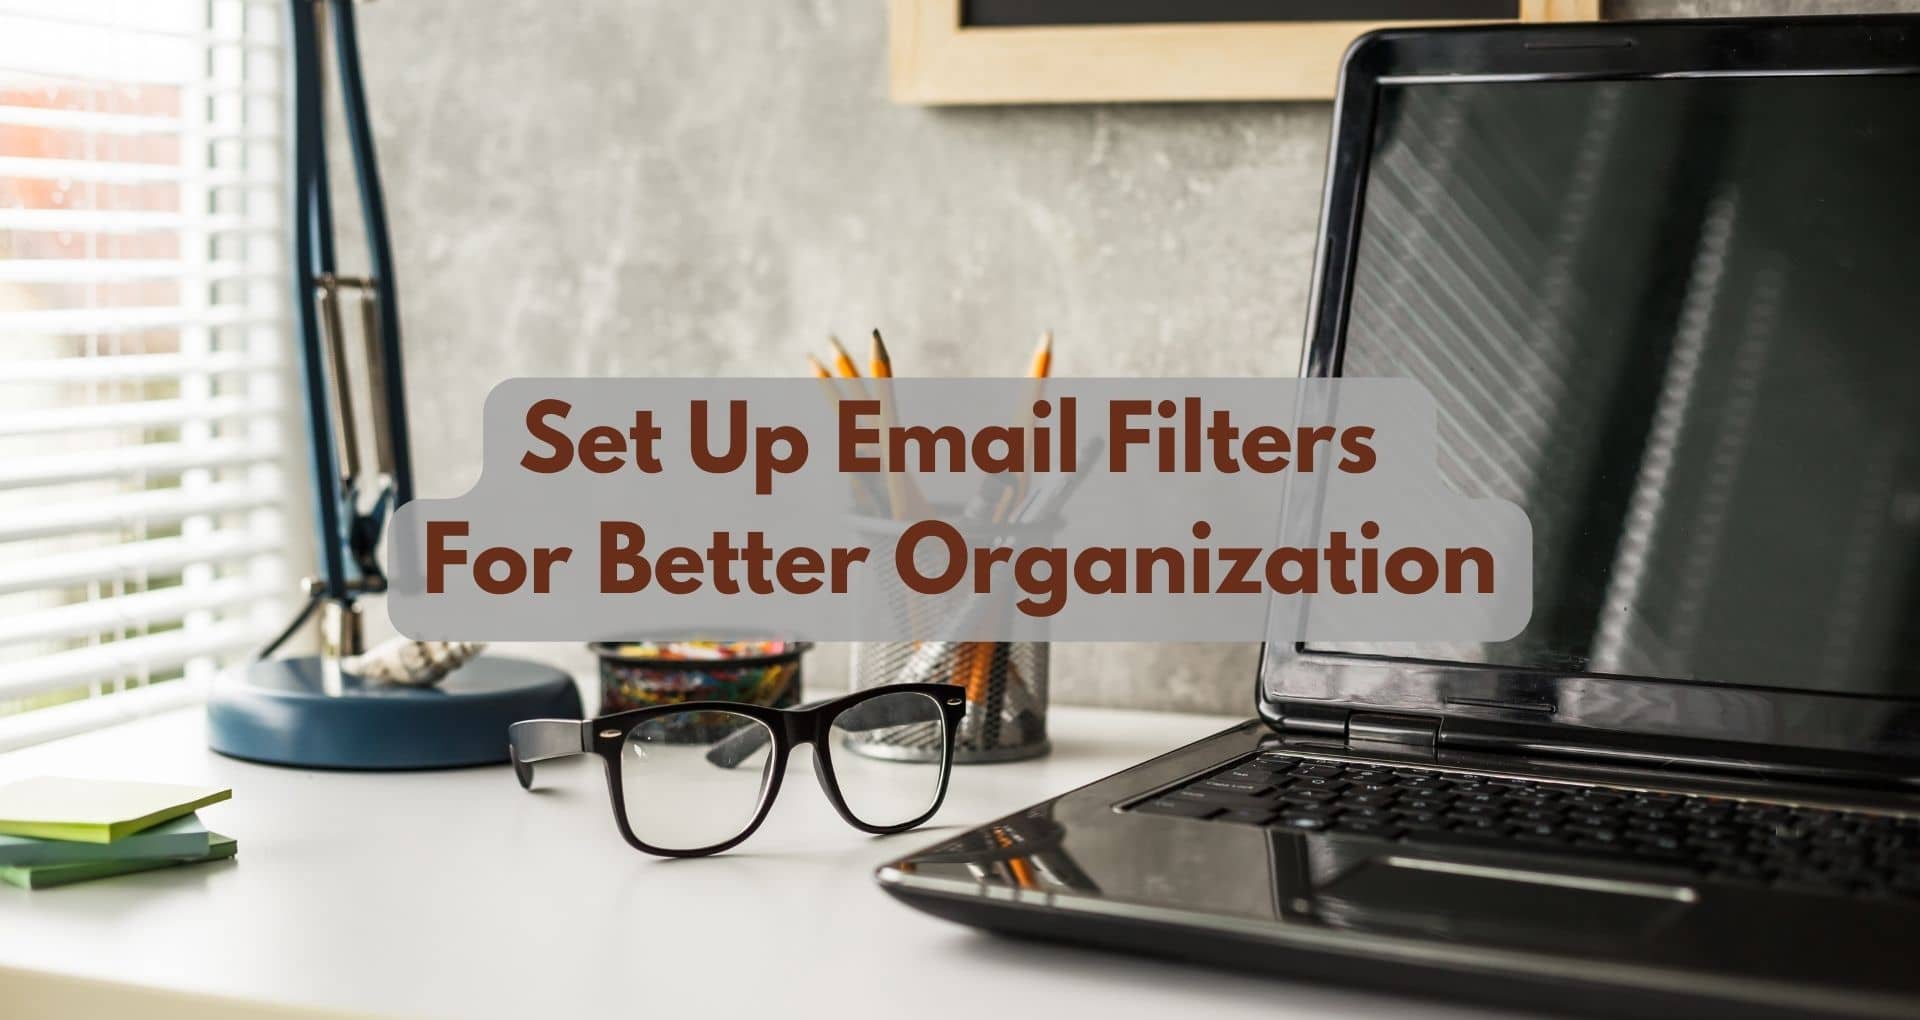 How To Set Up Email Filters For Better Organization?